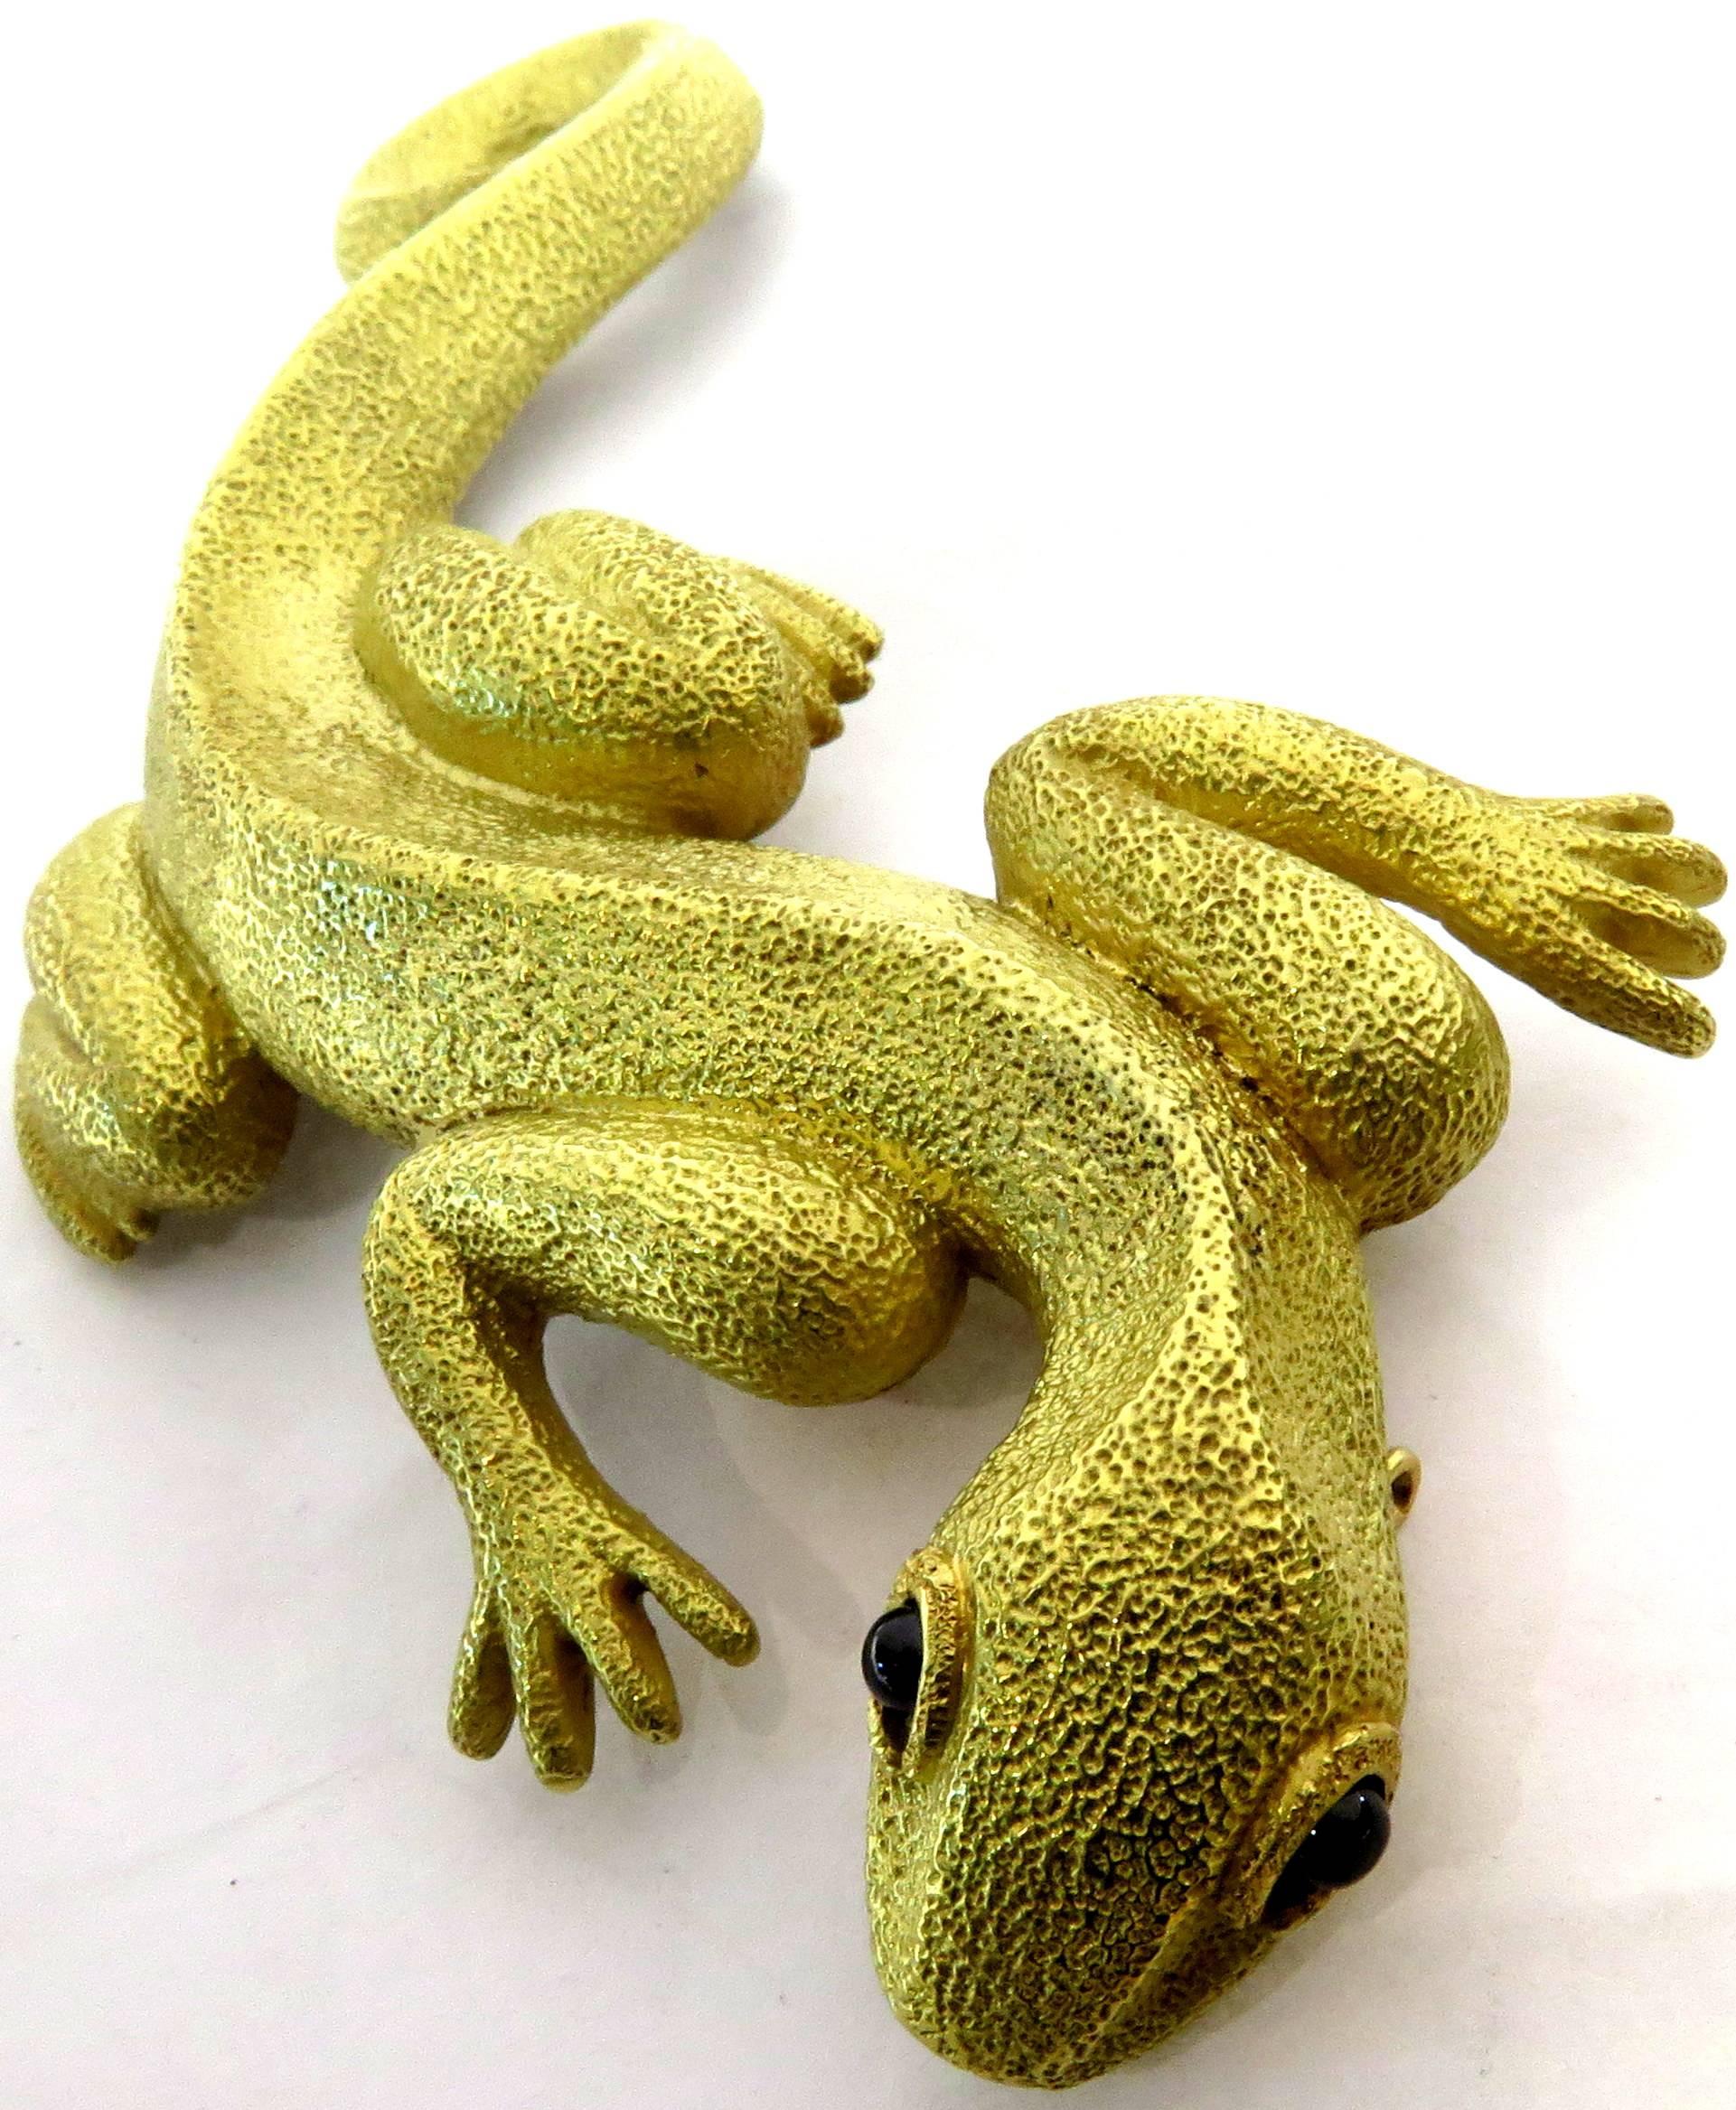 Kieselstein-Cord Enormous Gold Lizard/Salamander Sapphire Pin/Brooch Dated 1990 For Sale 2